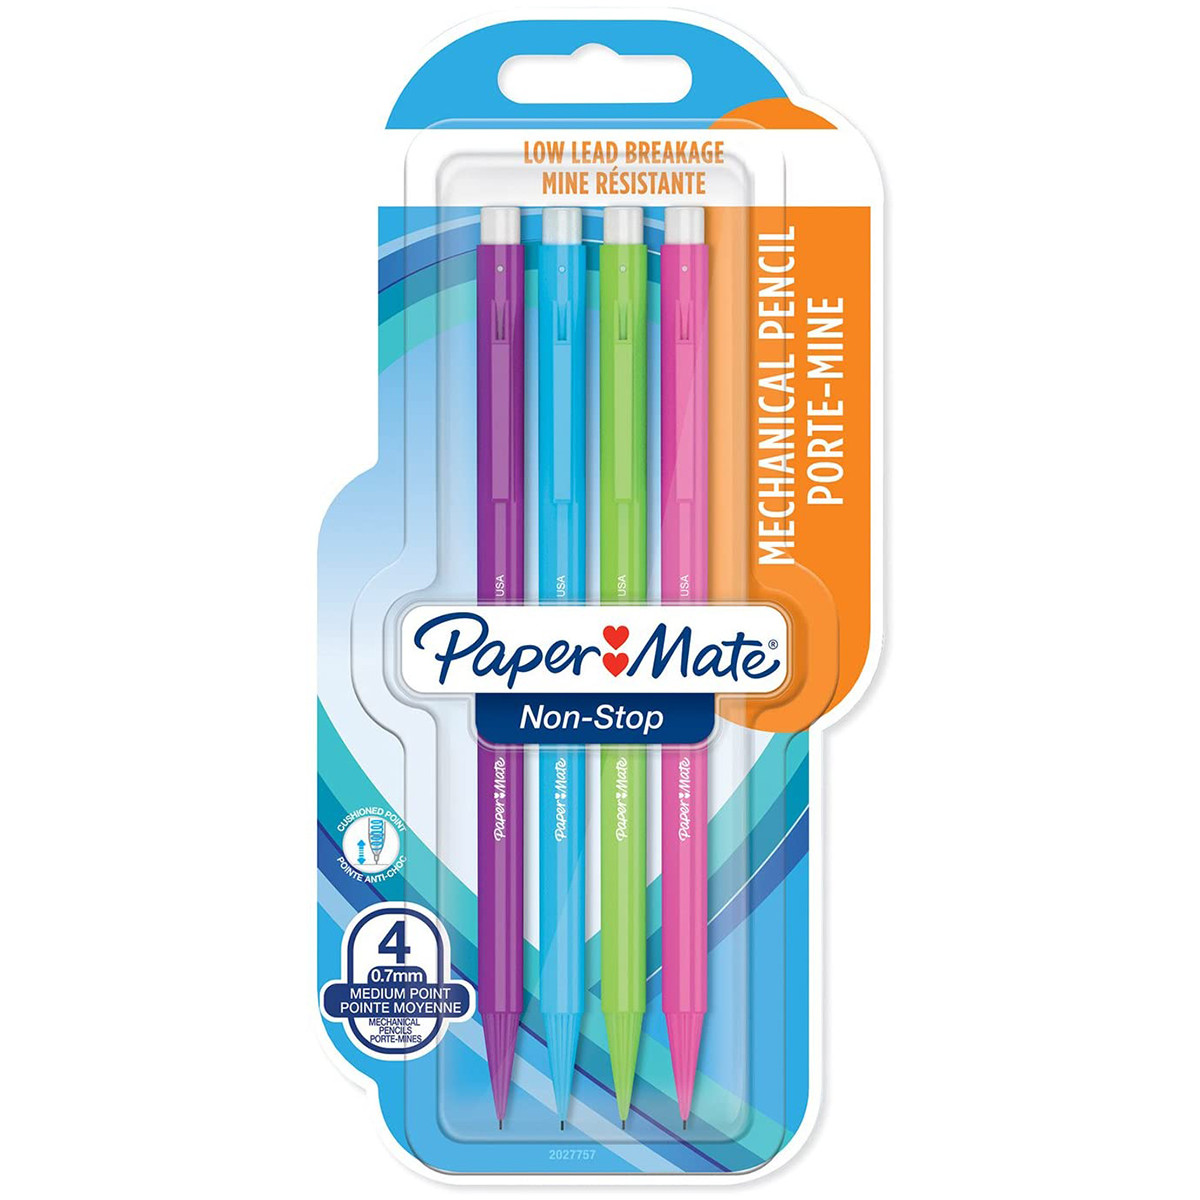 Papermate Sharpwriter Mechanical Pencil - 0.7mm - Assorted Neon Colours (Blister of 4)